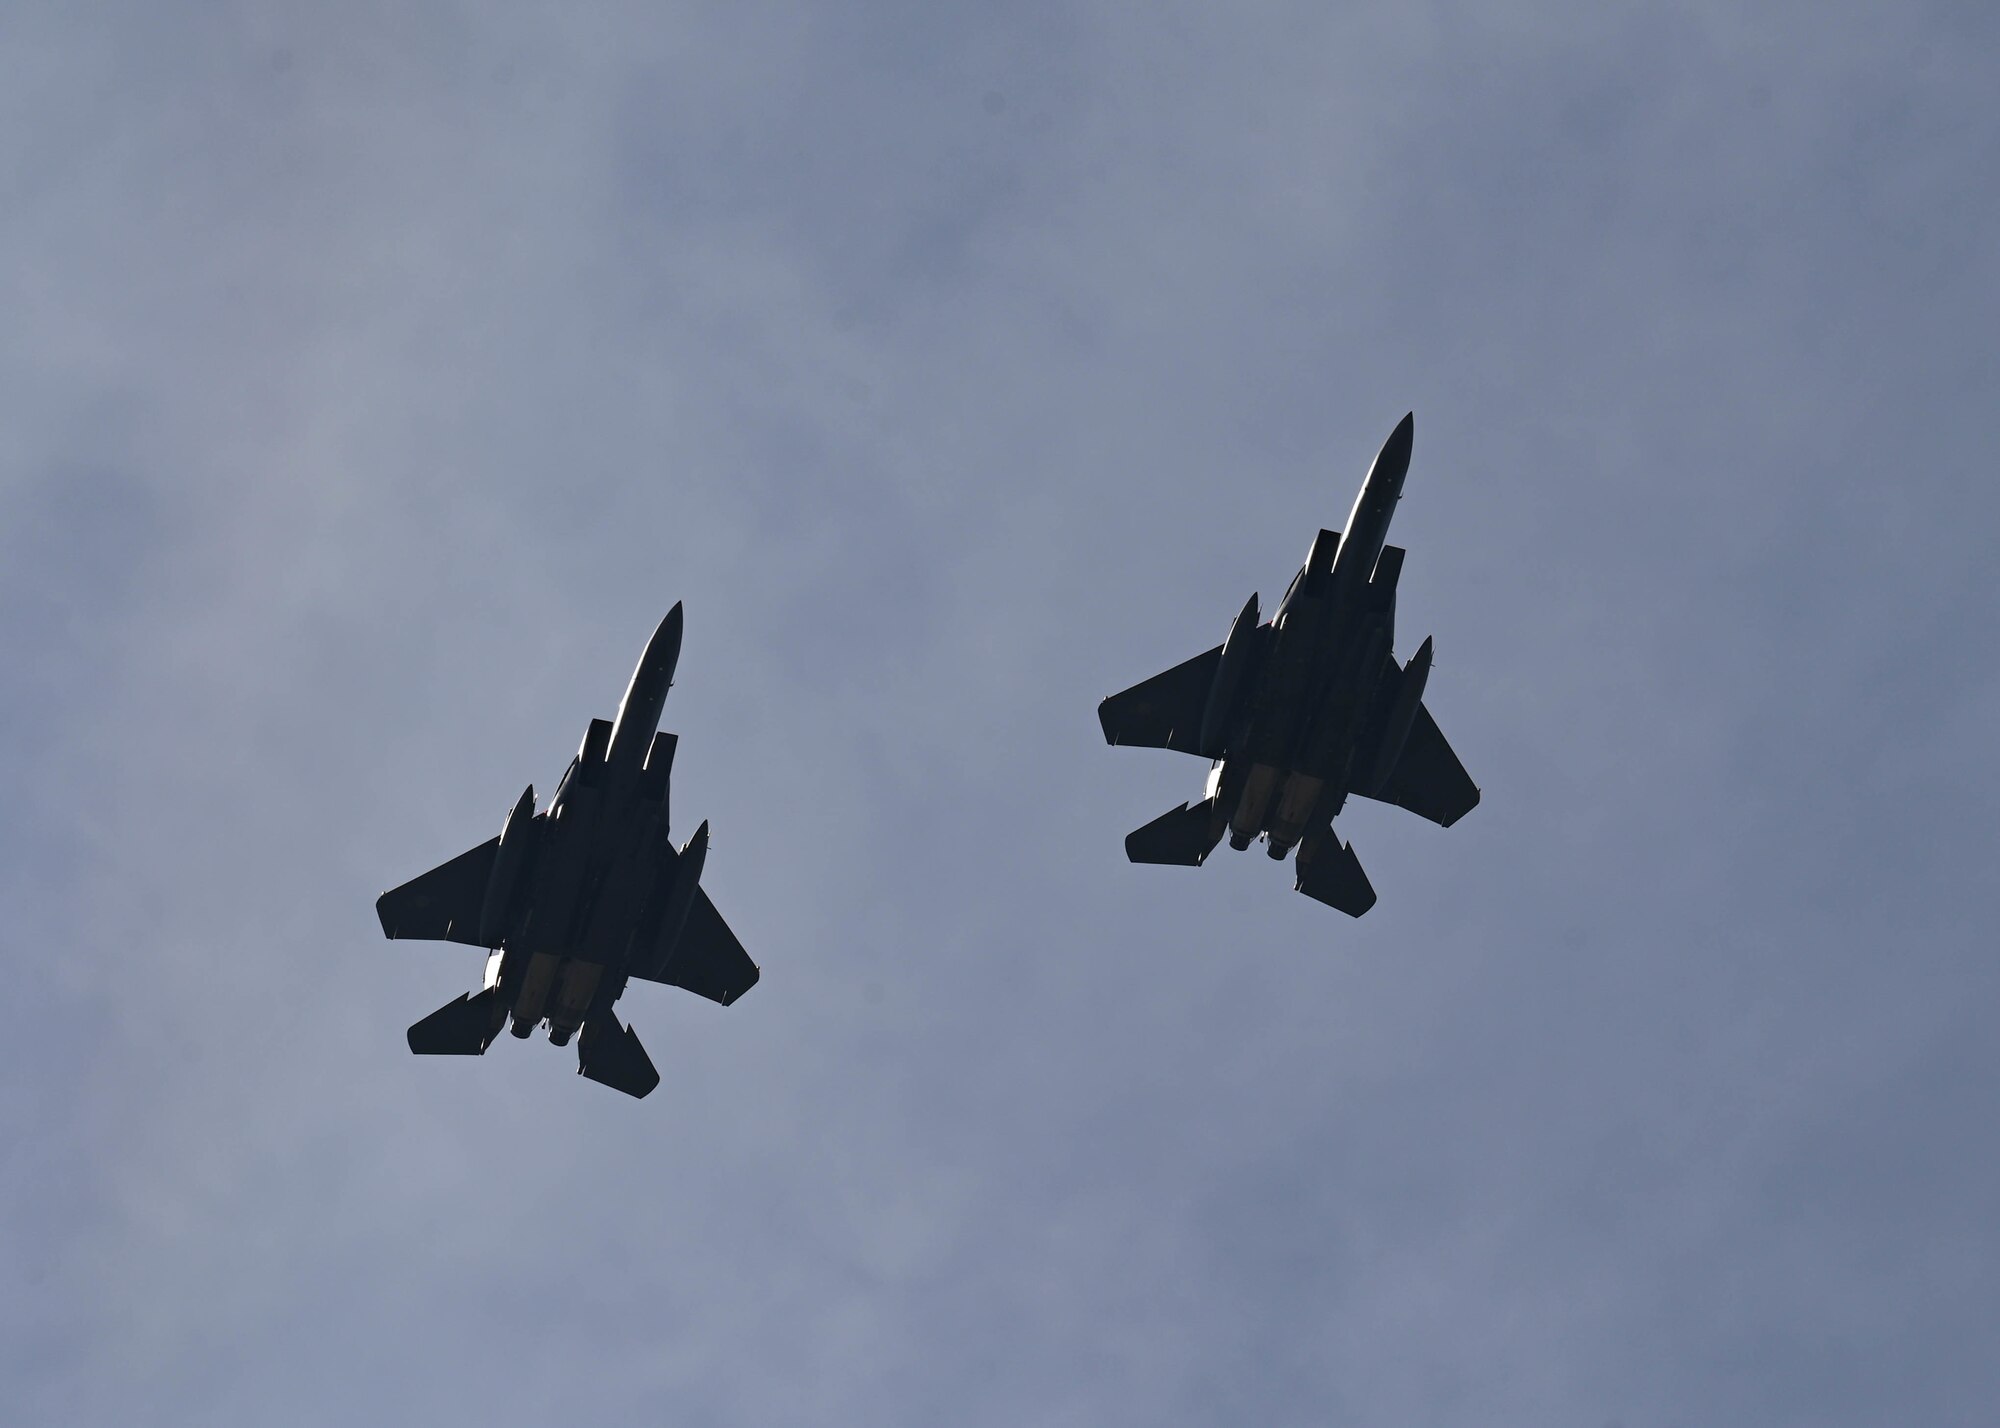 Two Republic of Korea Air Force F-15K Slam Eagles assigned to the 110th Fighter Squadron fly above Kunsan Air Base, Republic of Korea, Sept. 22, 2022. The F-15K Slam Eagle is a mutli-role fighter aircraft in service with ROKAF since 2005. (U.S. Air Force photo by Staff Sgt. Isaiah J. Soliz)